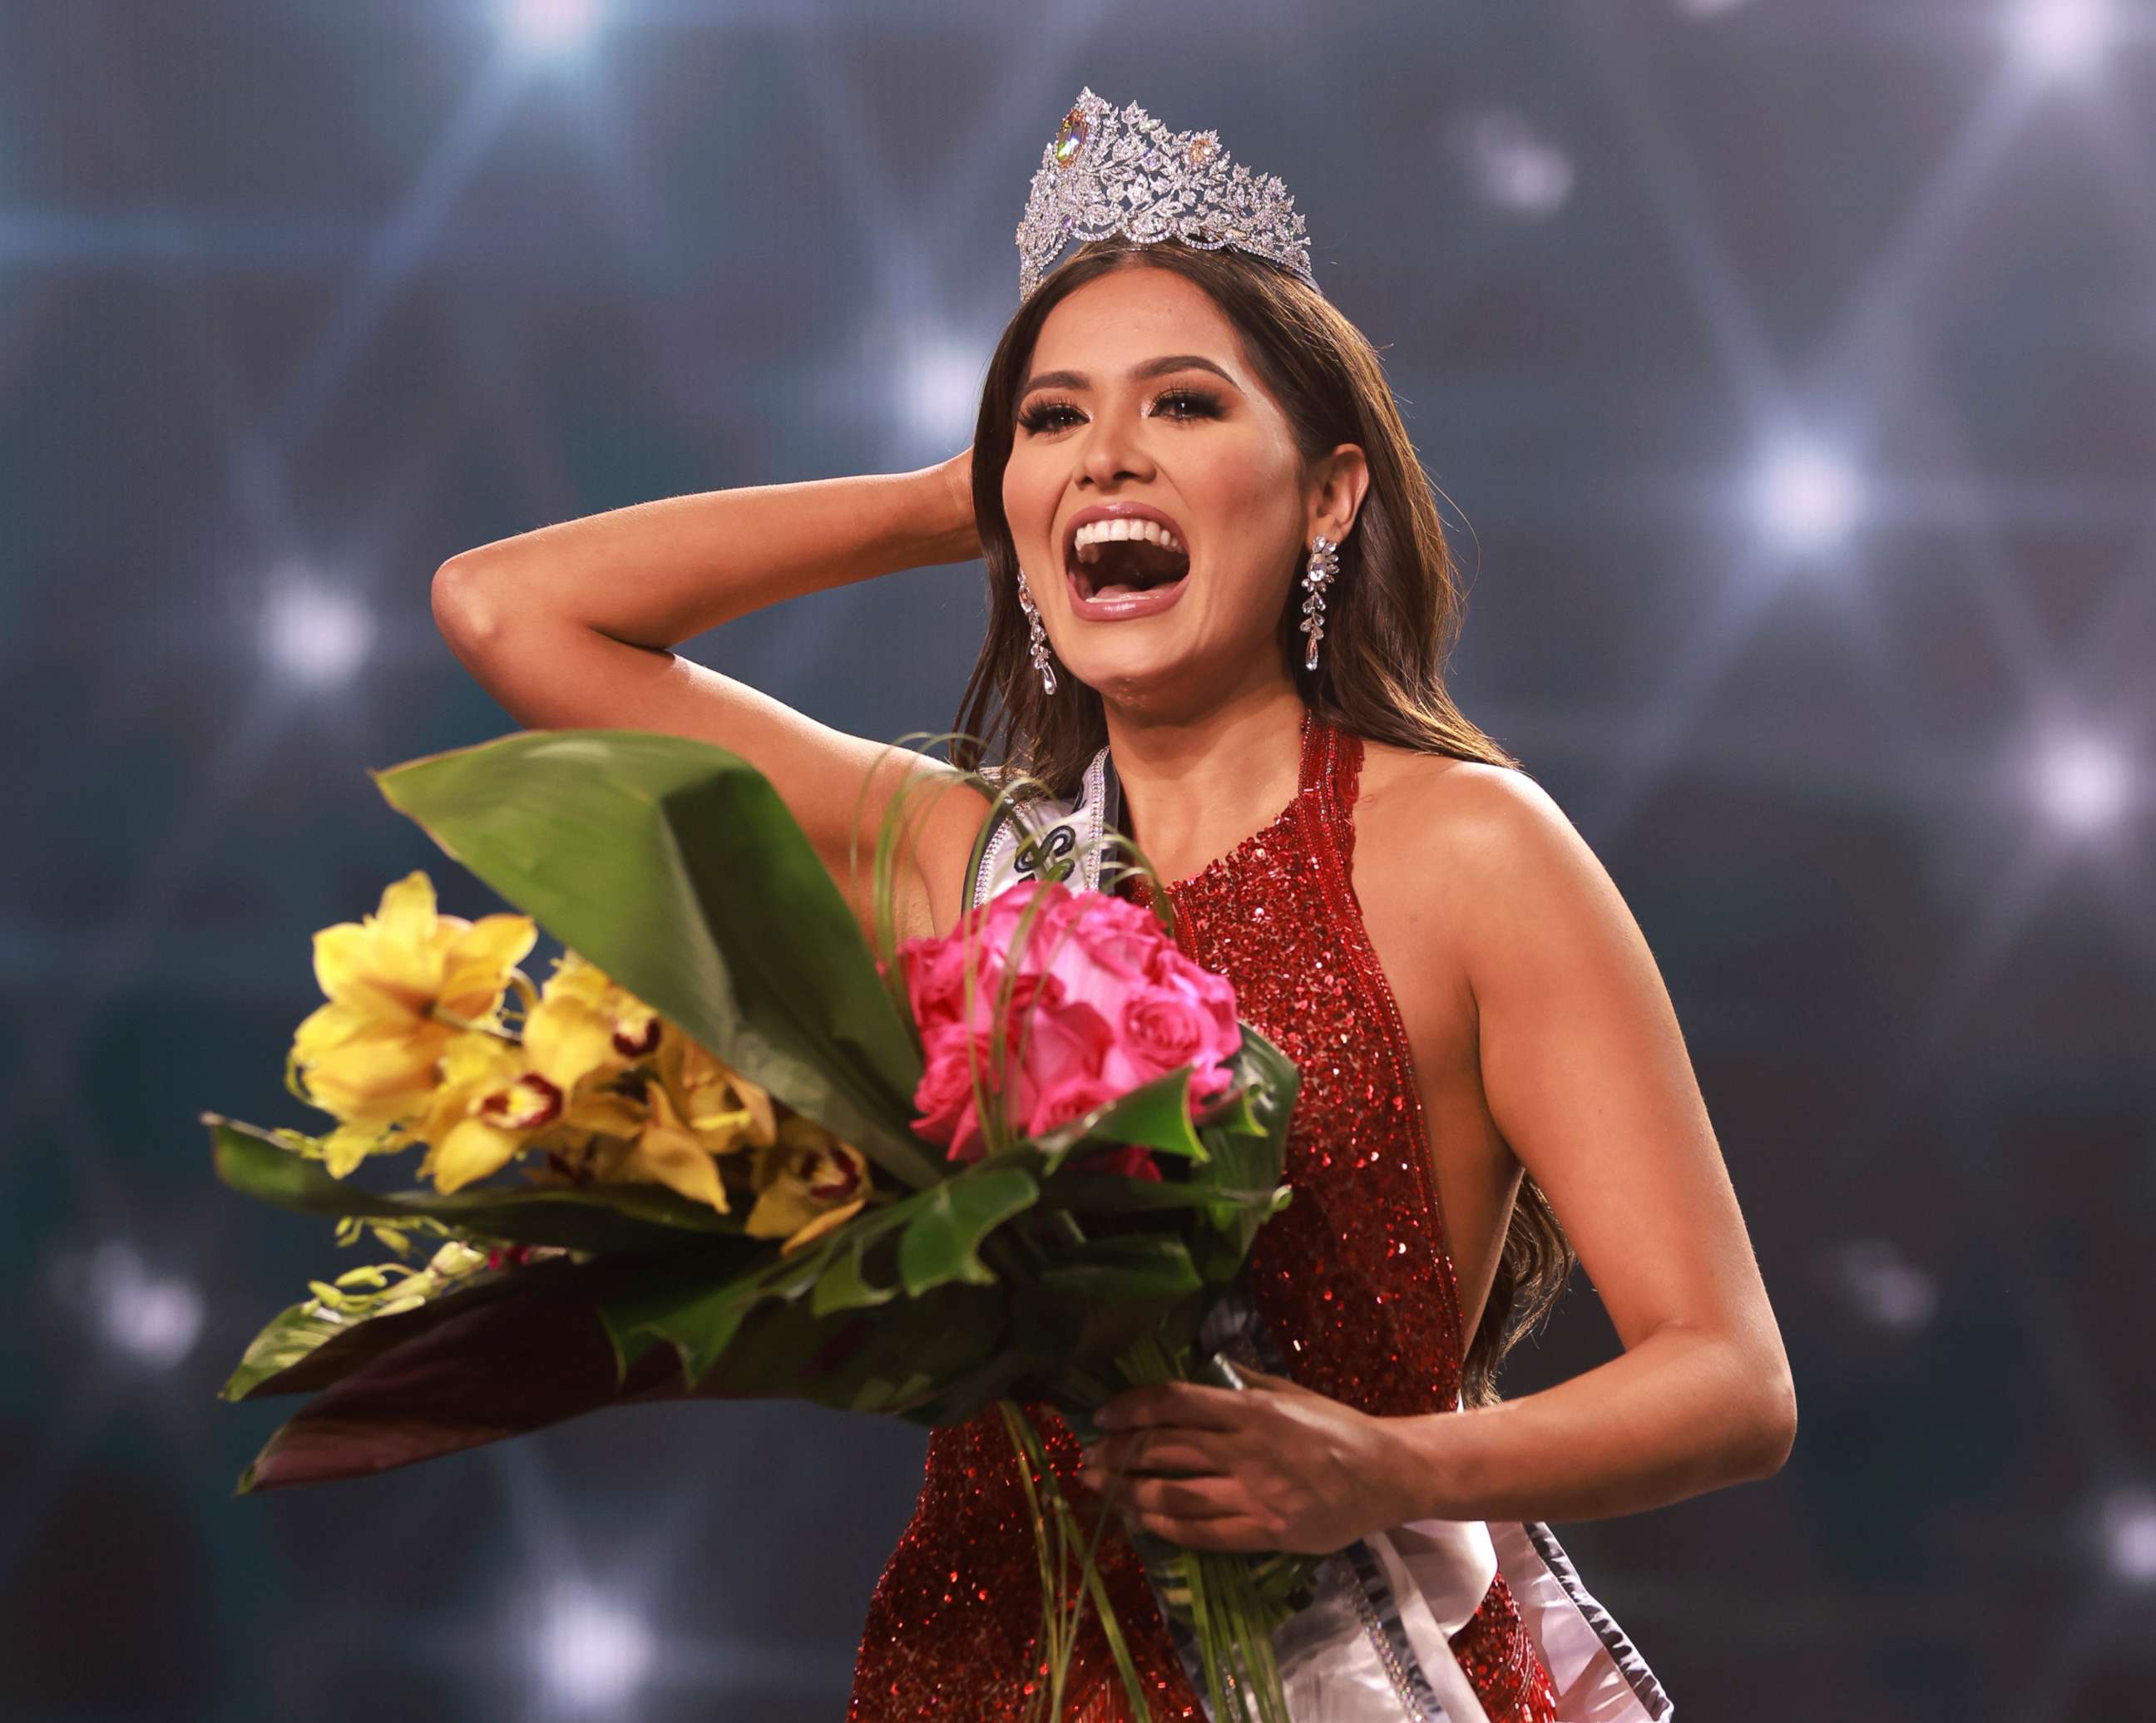 PHOTO: This image released by Miss Universe Organization shows Miss Universe Mexico 2020 Andrea Meza who was crowned Miss Universe at the 69th Miss Universe Competition at the Seminole Hard Rock Hotel & Casino in Hollywood, Fla., on May 16, 2021.